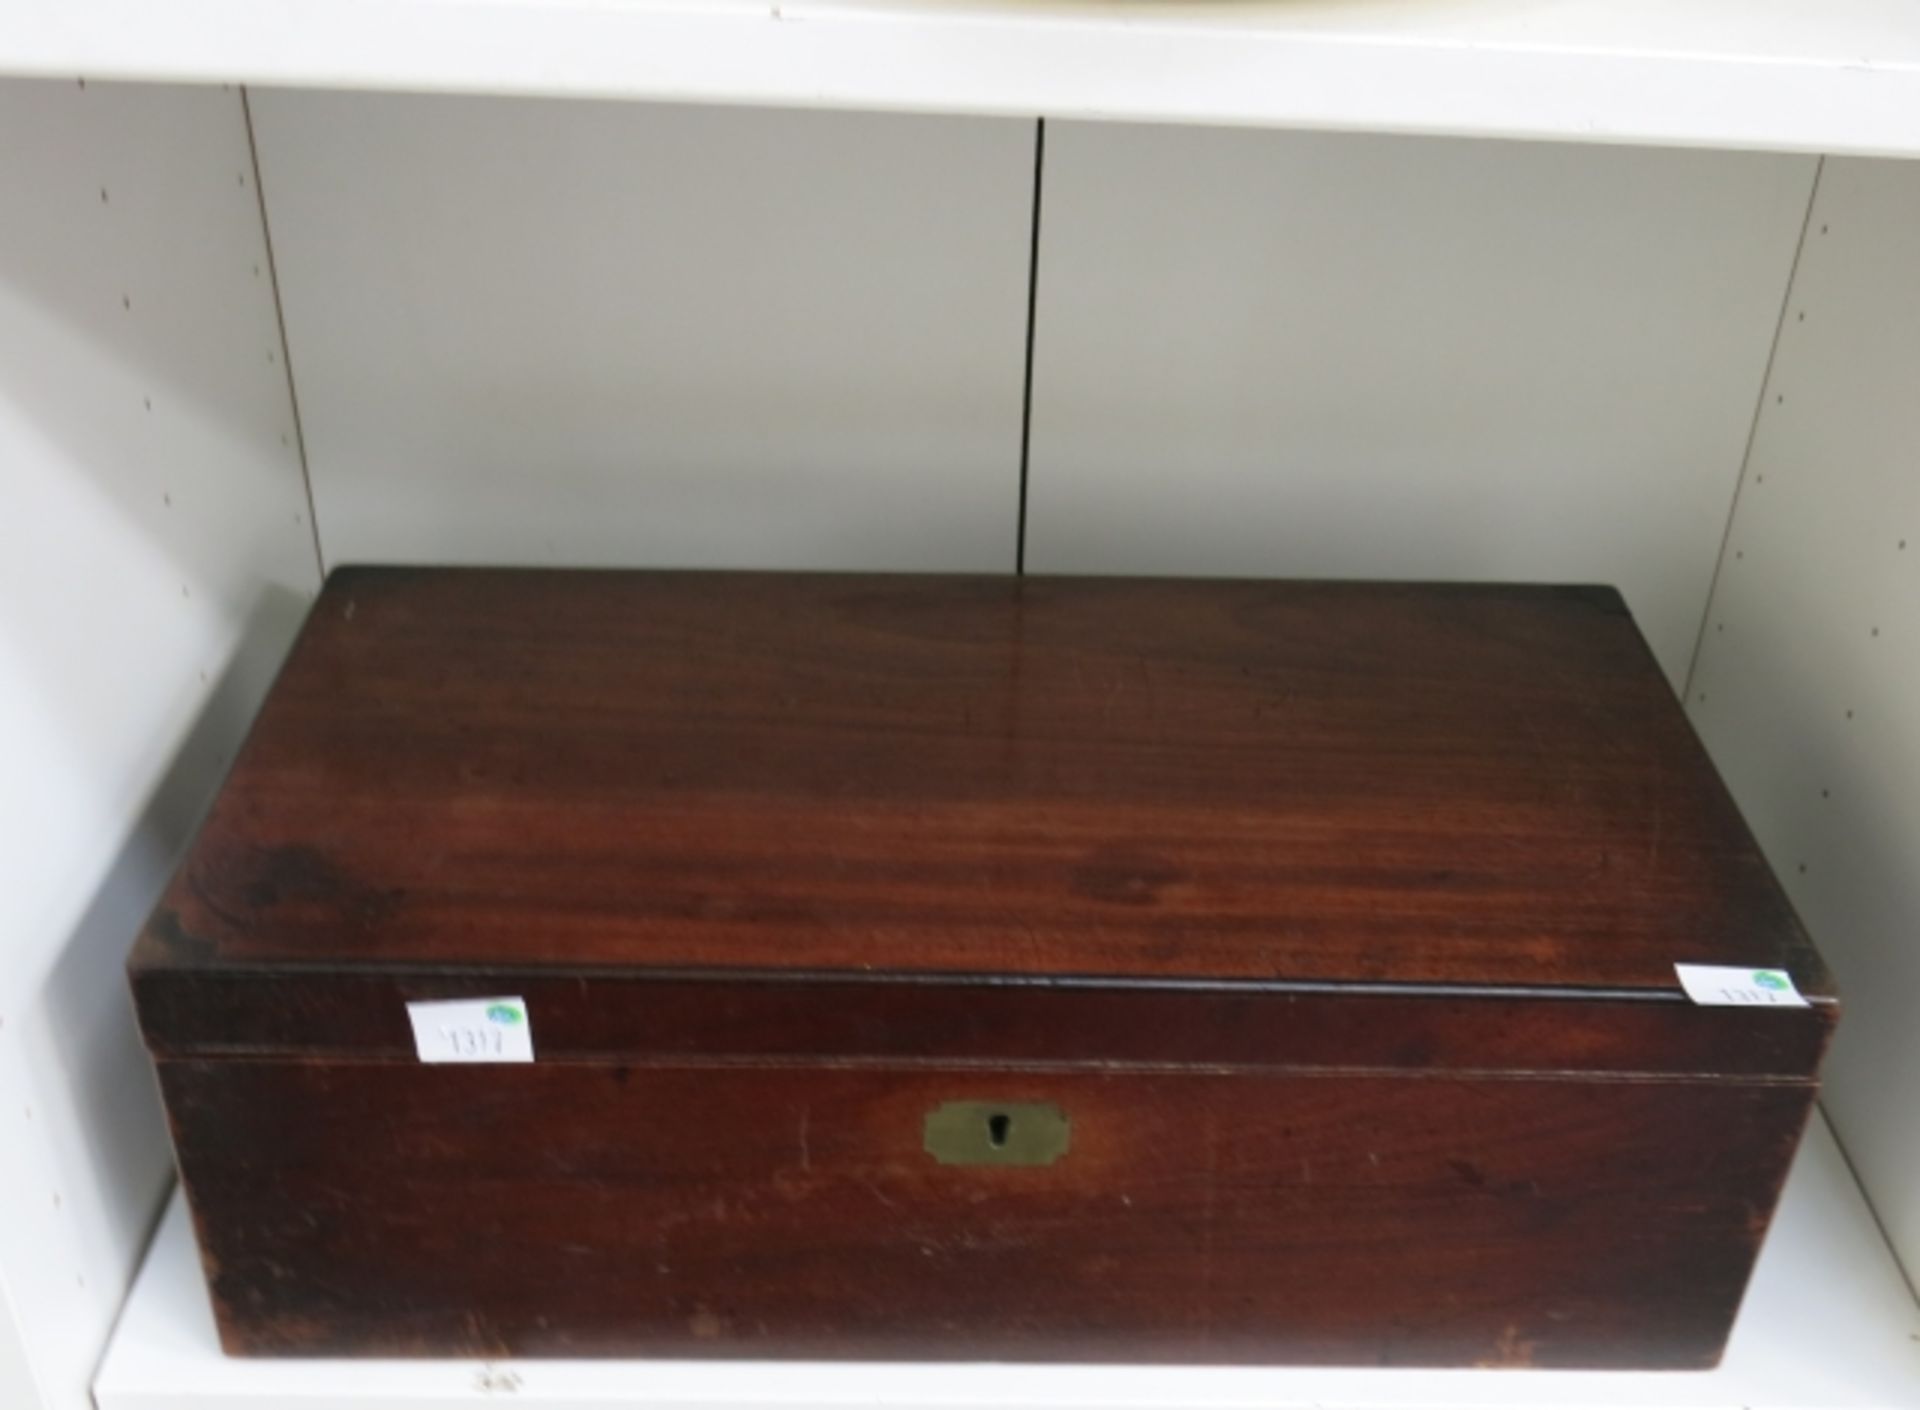 Mahogany writing box with fitted interior 45 x 24 x 15cm (est. £60-£80)